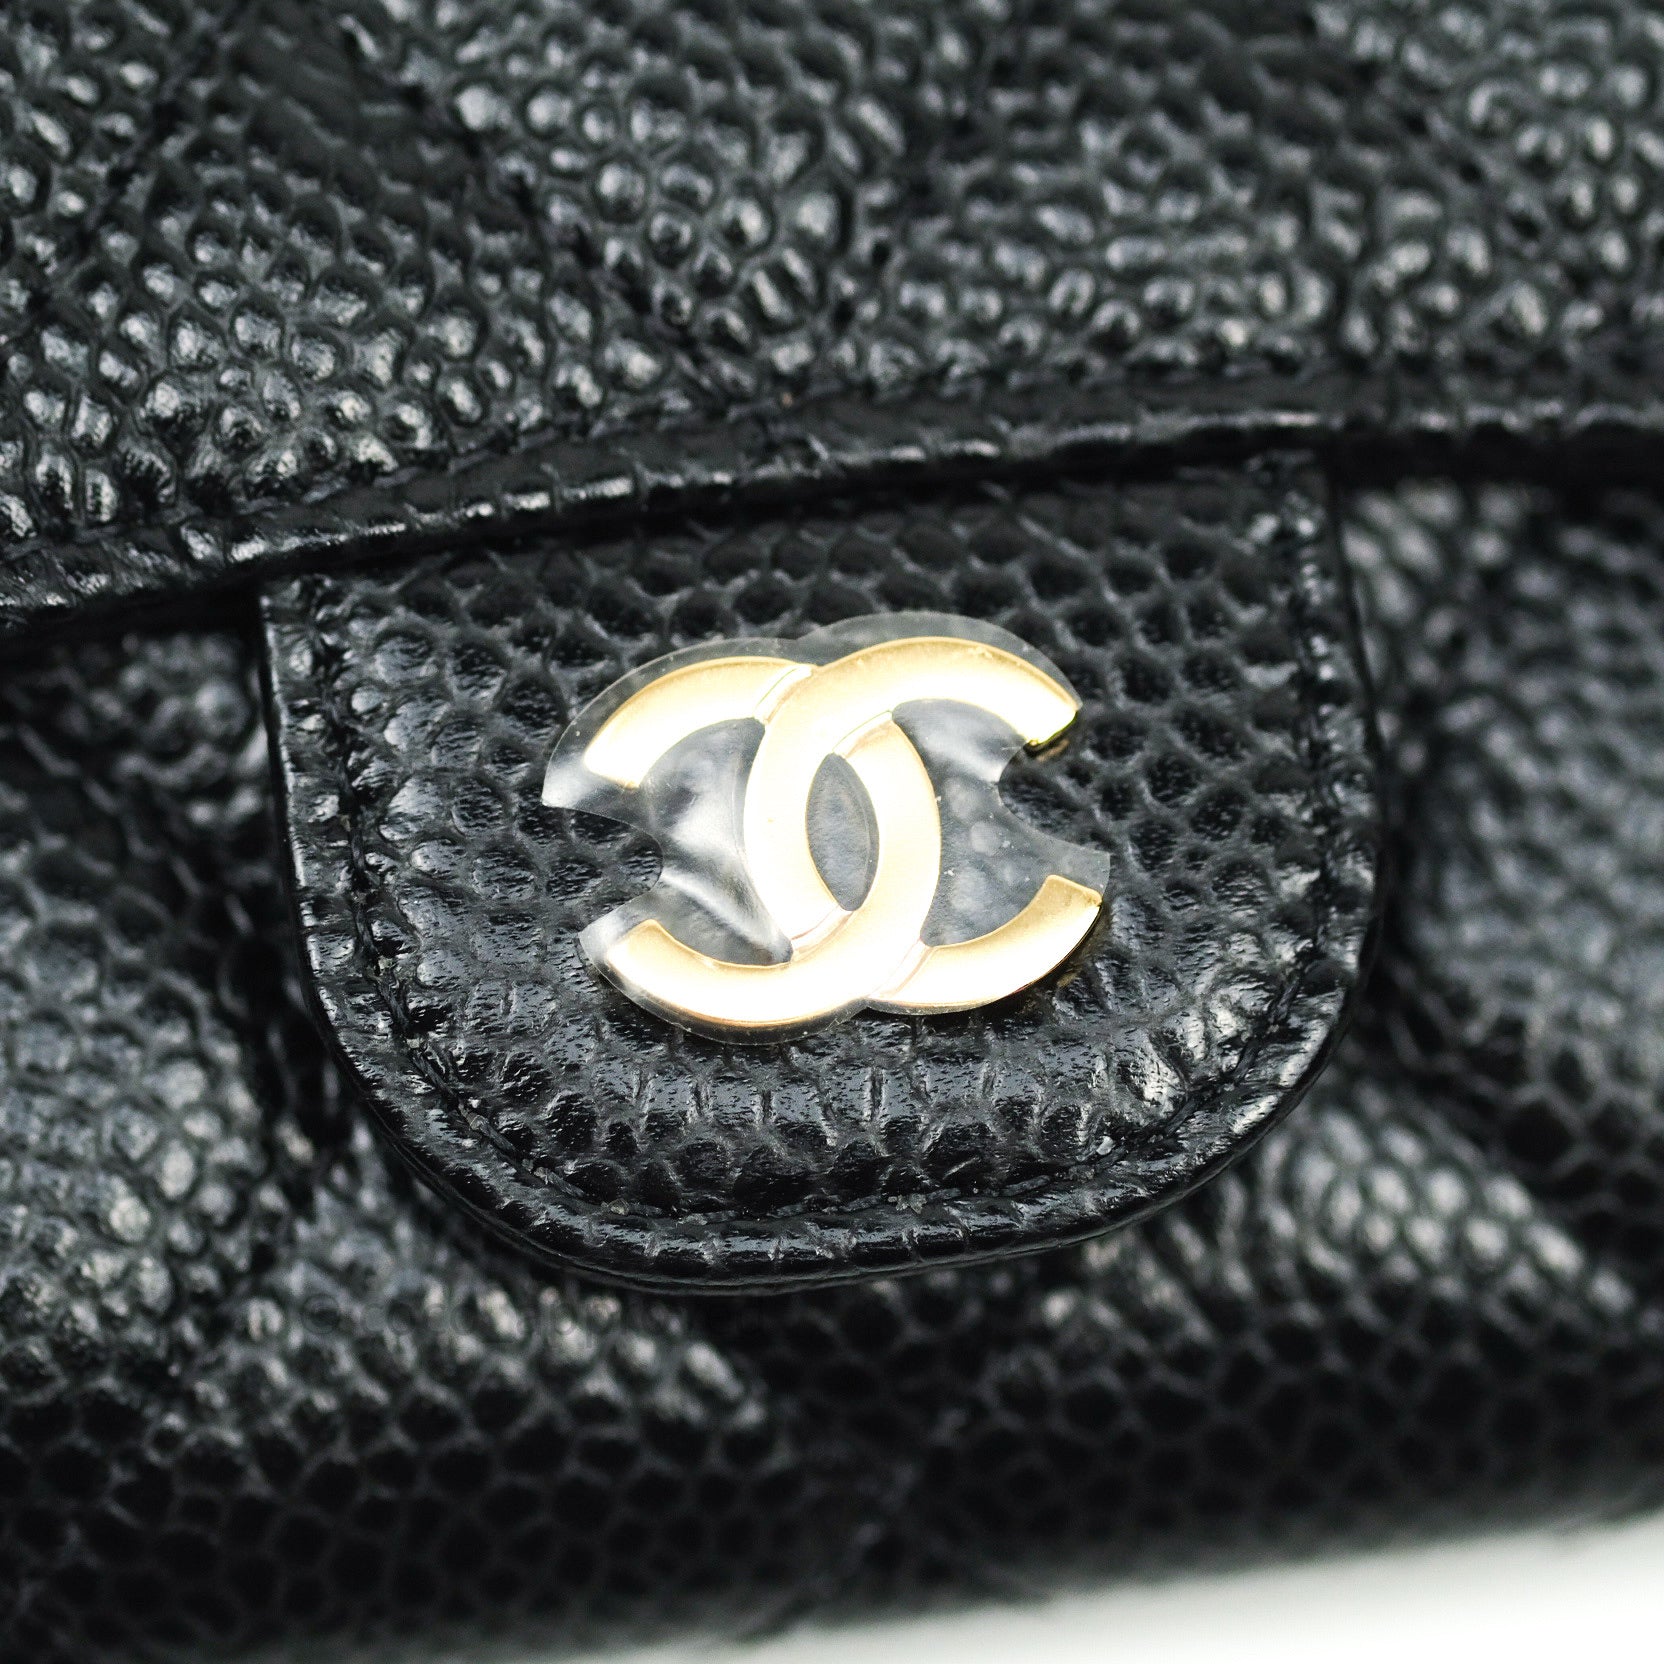 CHANEL Caviar Quilted Classic 4 Key Holder Wallet Black 1159121